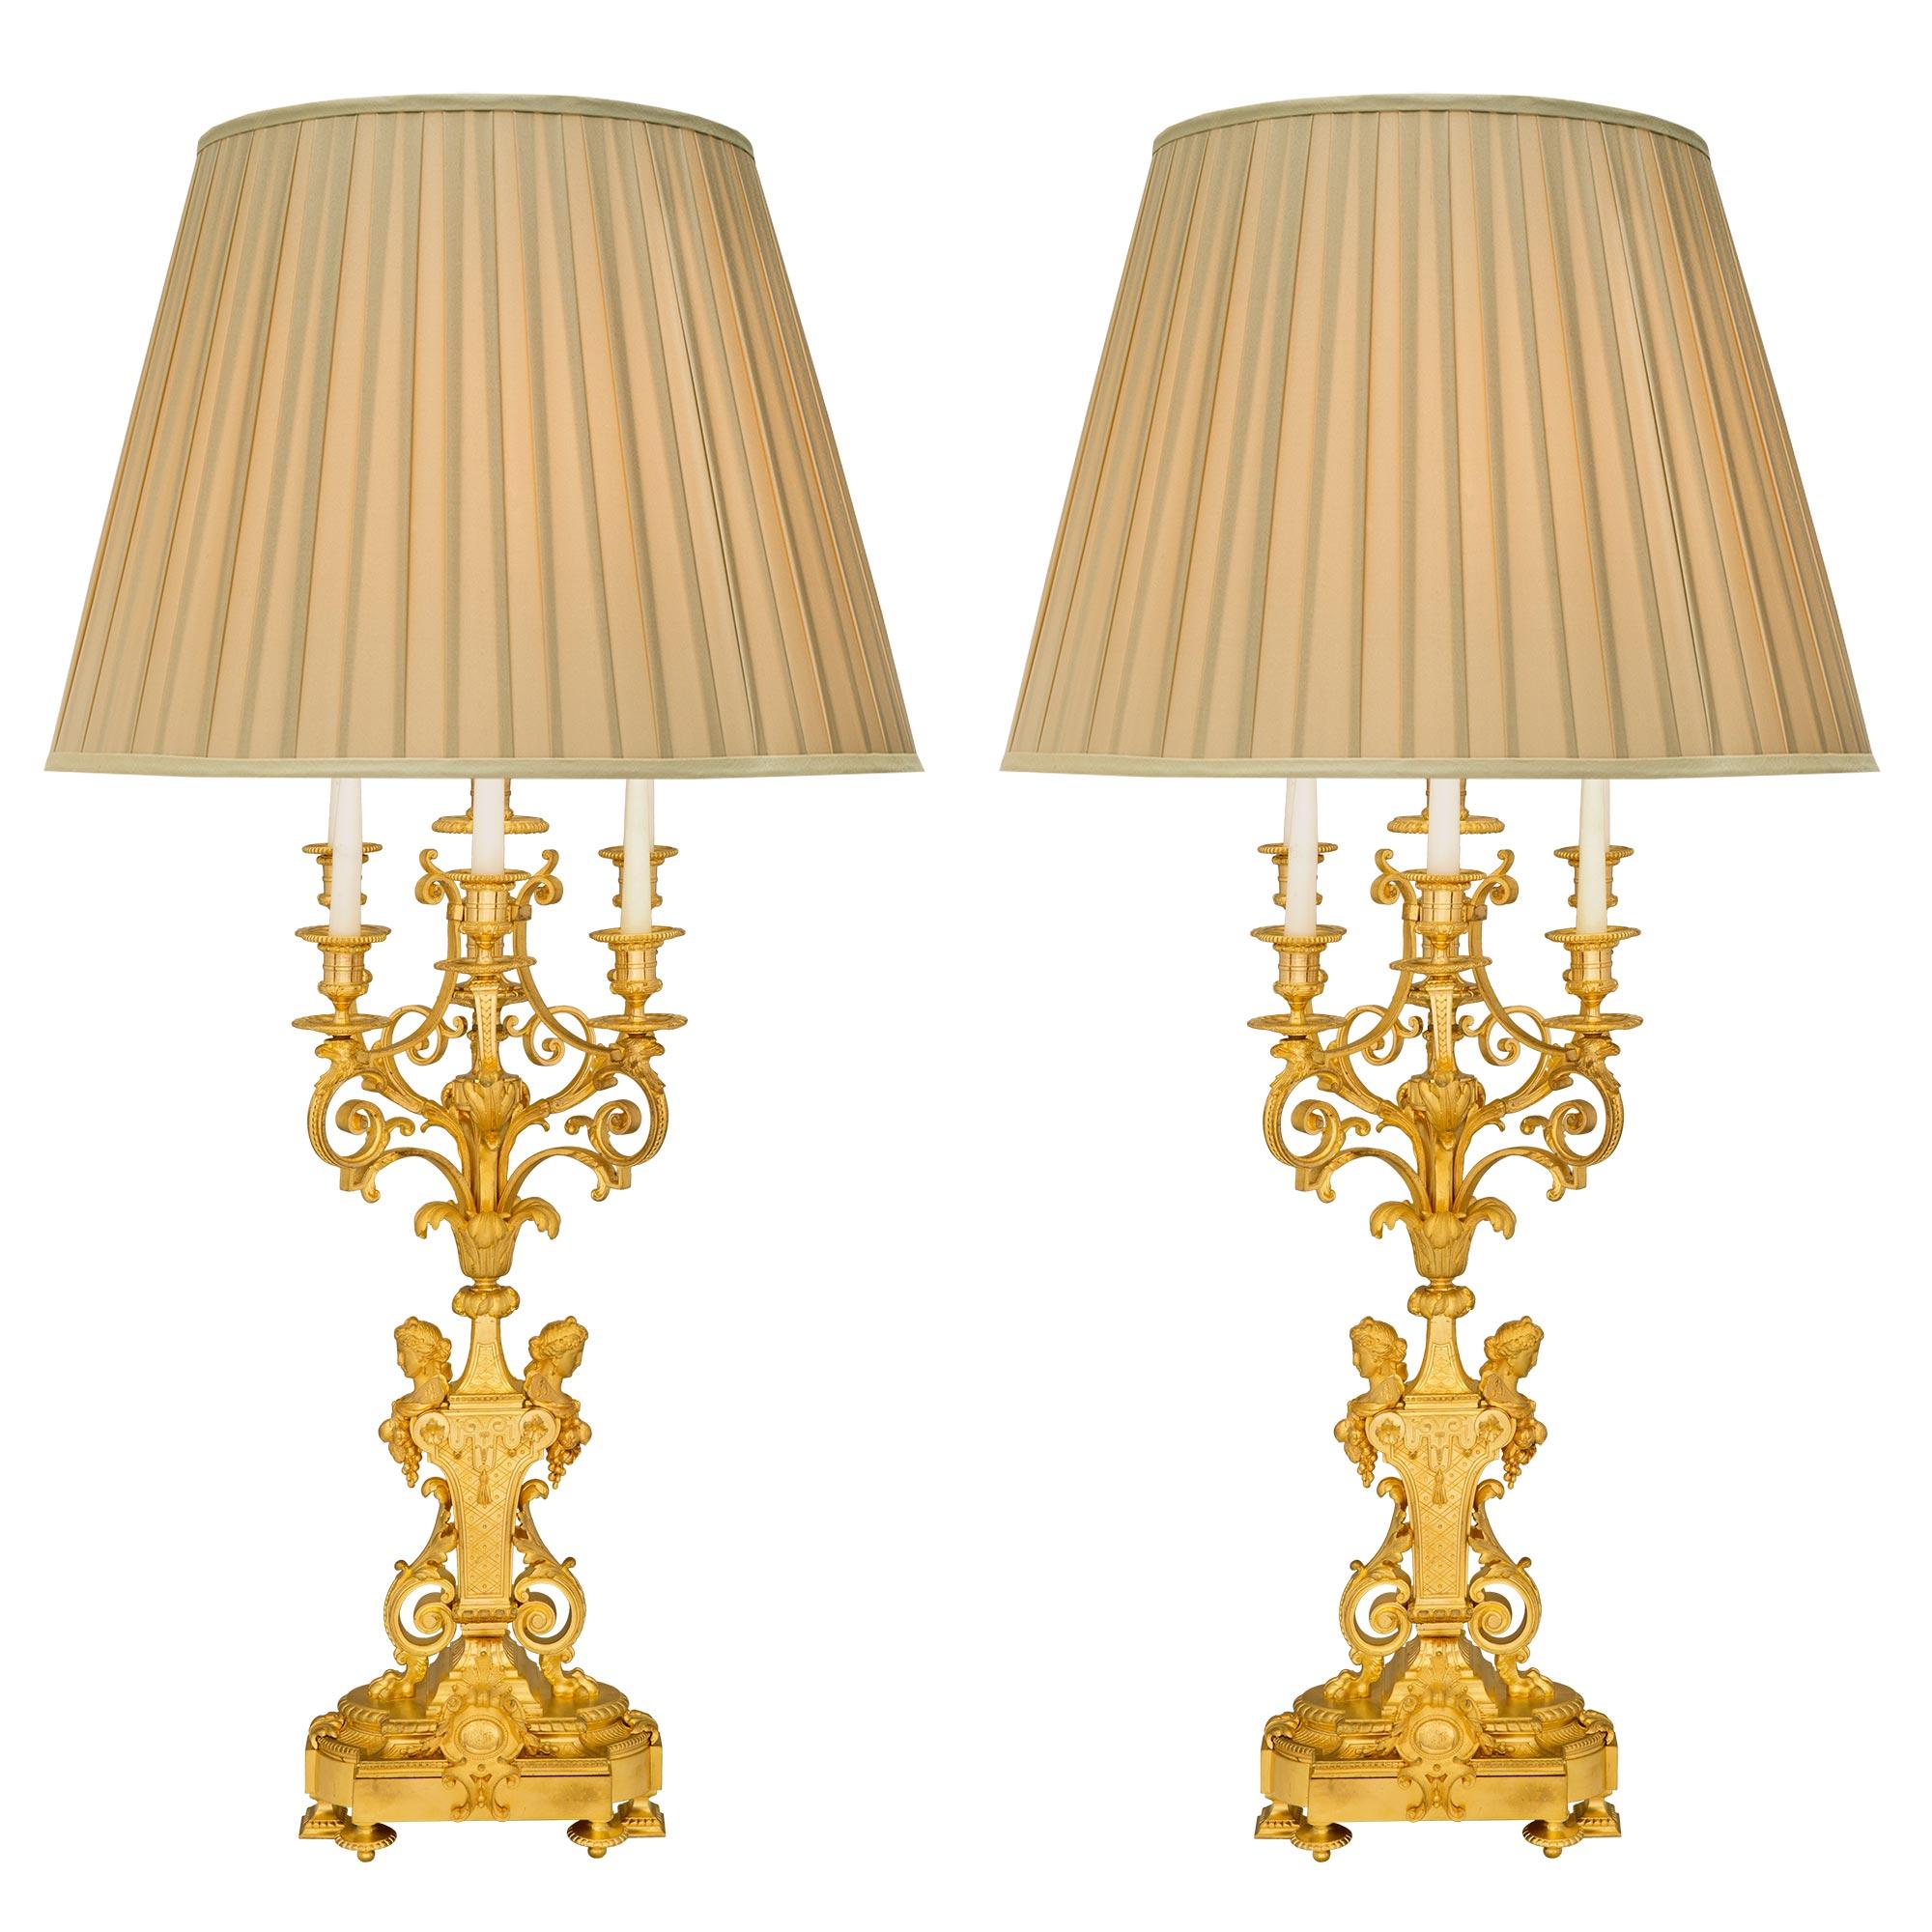 Pair of French 19th Century Louis XVI Style Belle Époque Period Ormolu Lamps